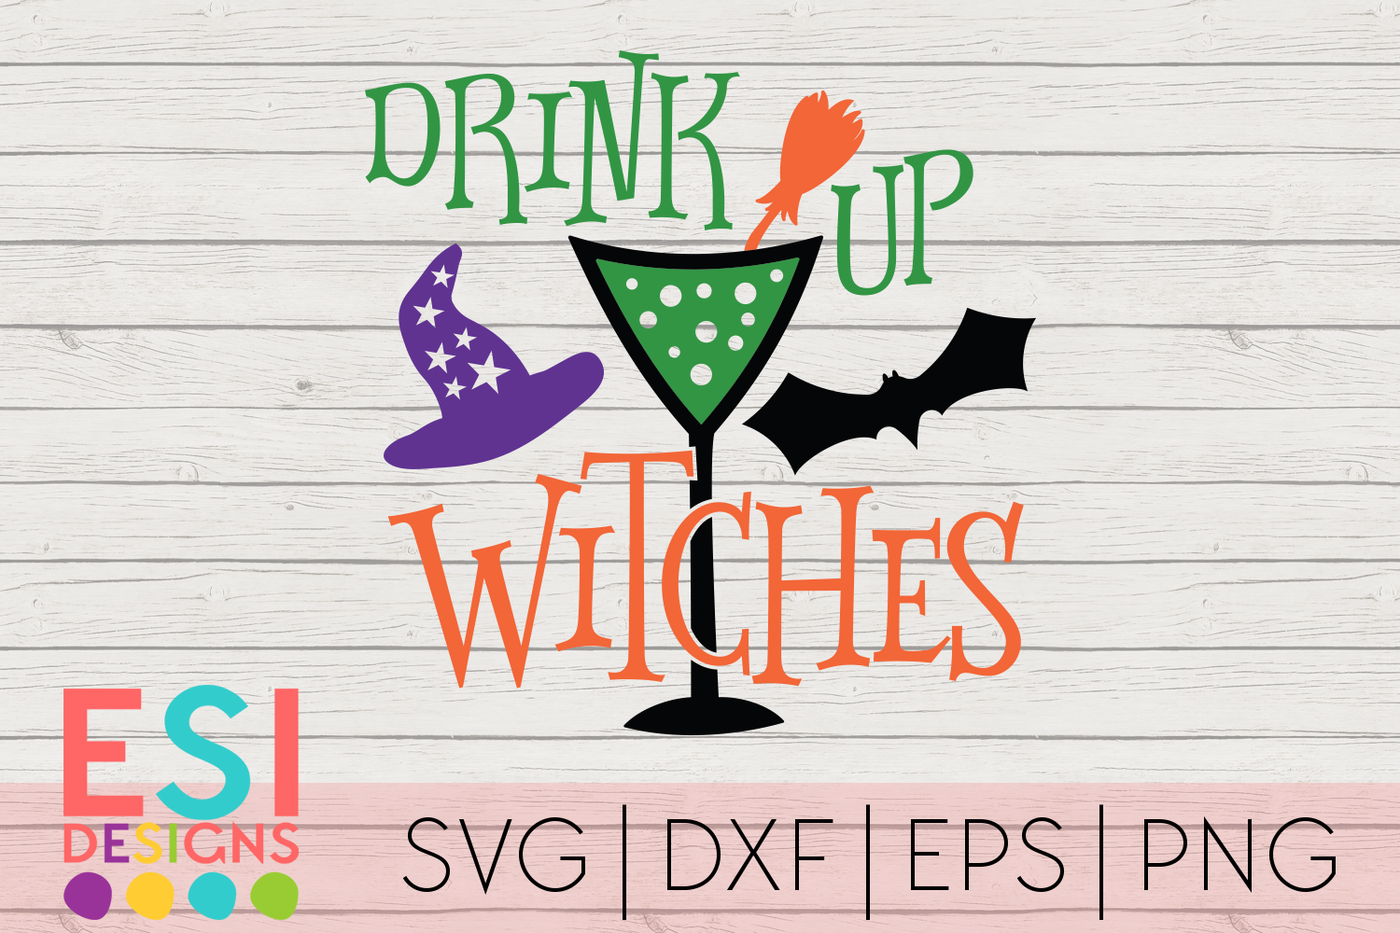 Drink up Witches.